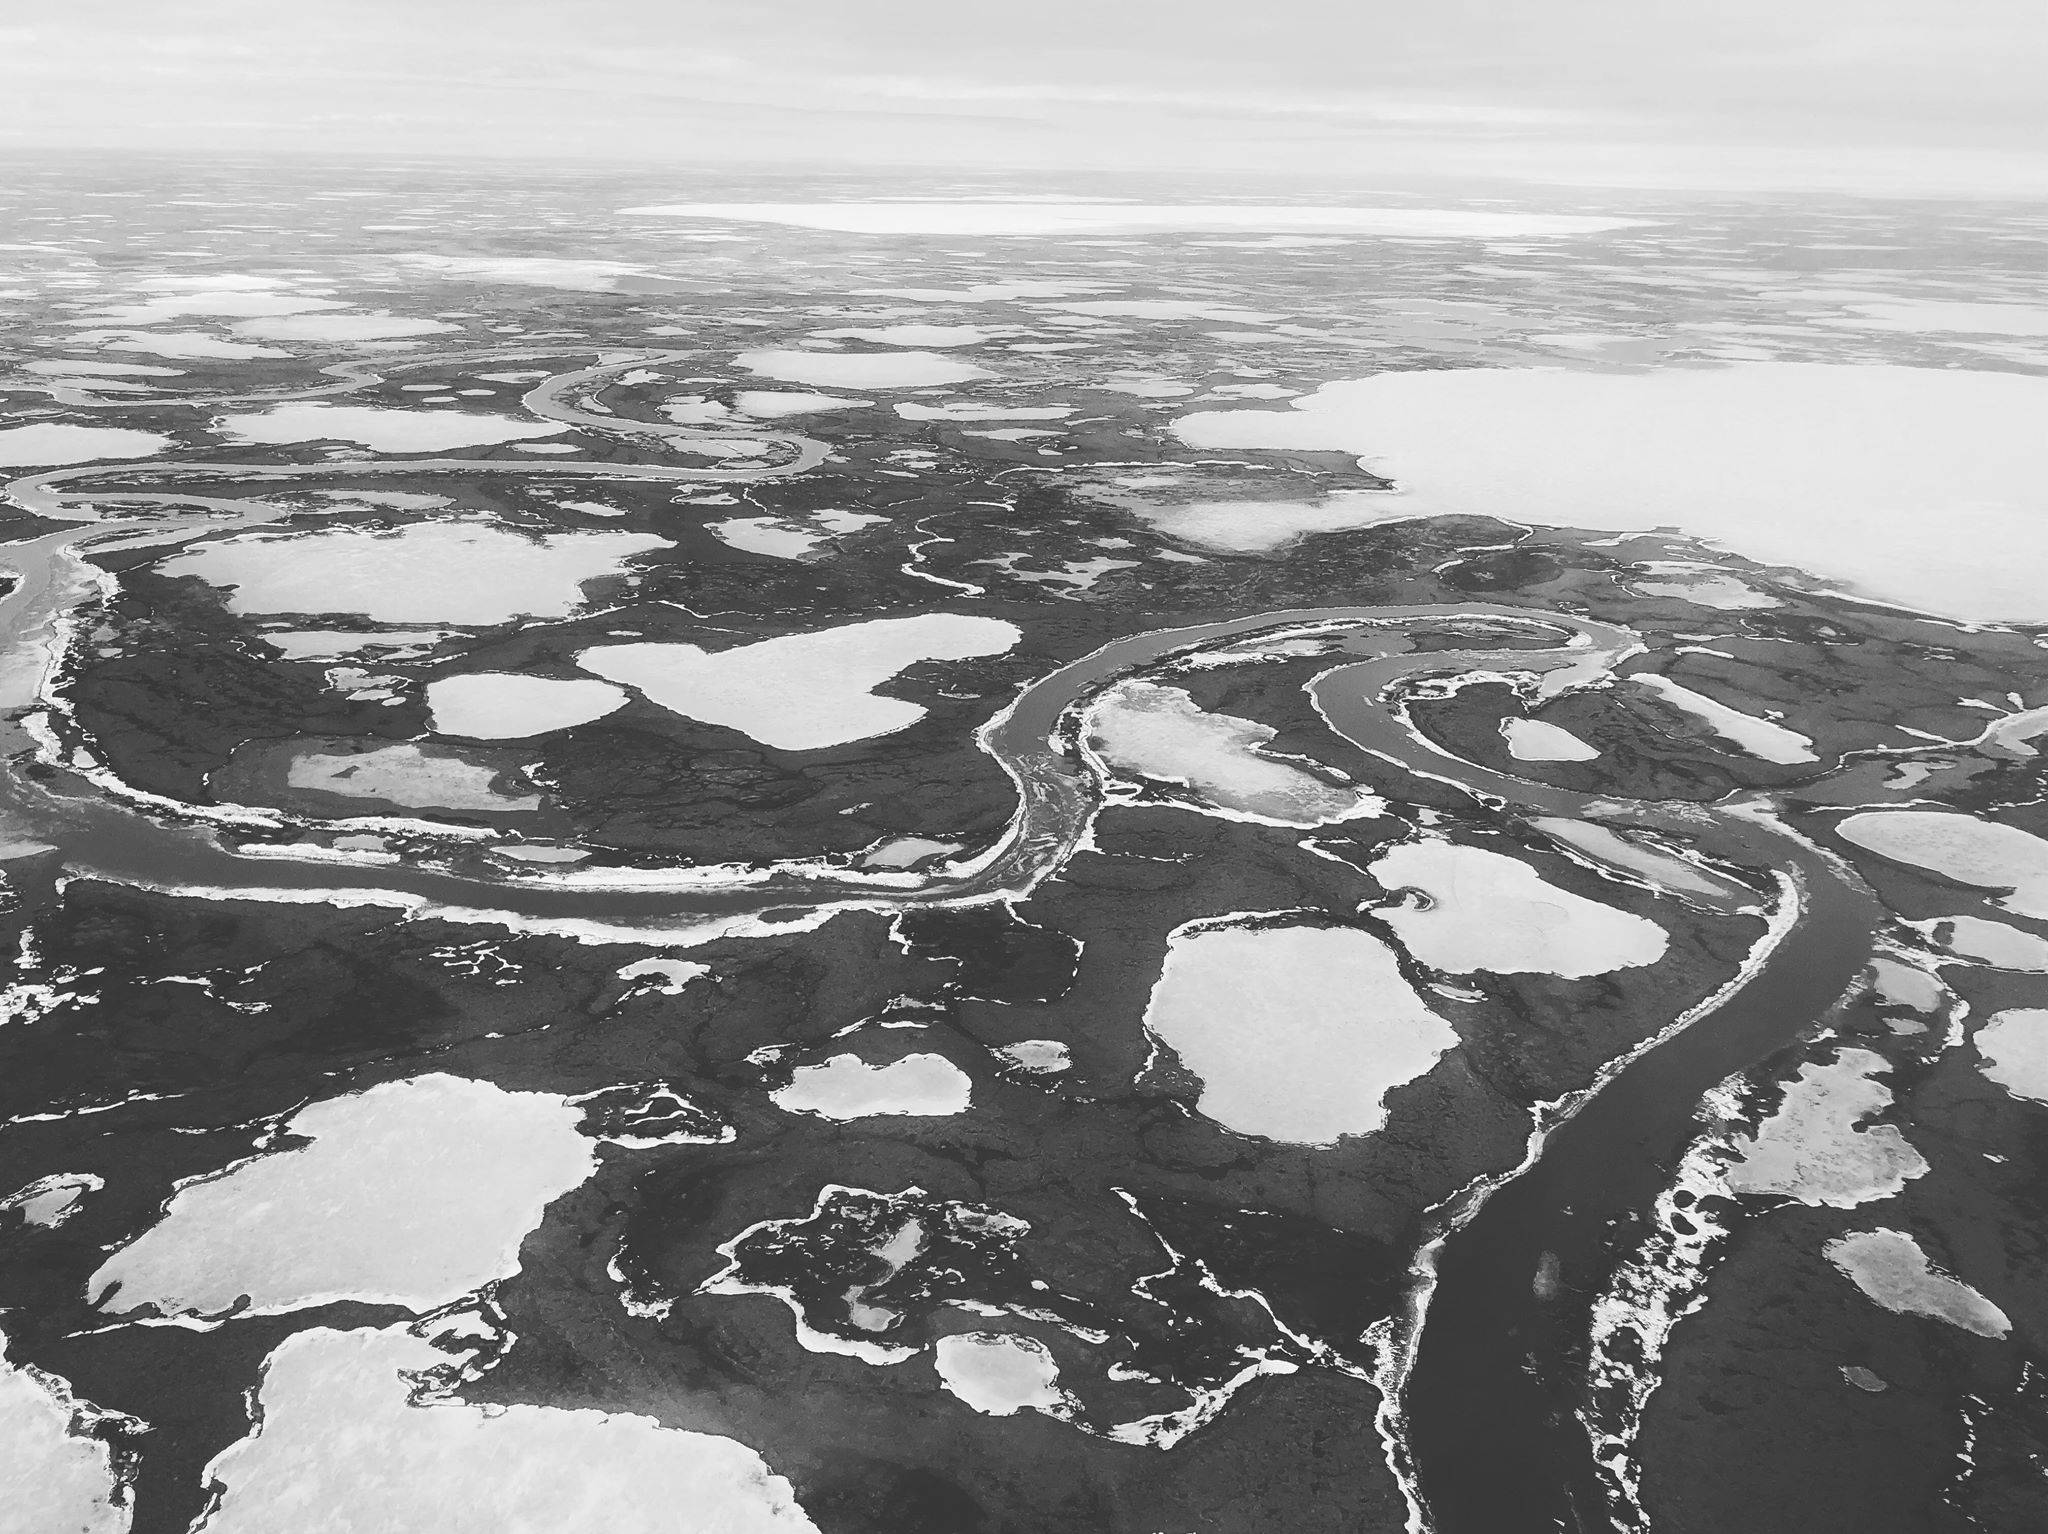 Flying over western Alaska, home to numerous Yup’ik communities, April 15, 2019. (Photo by Victoria Petersen/Peninsula Clarion)